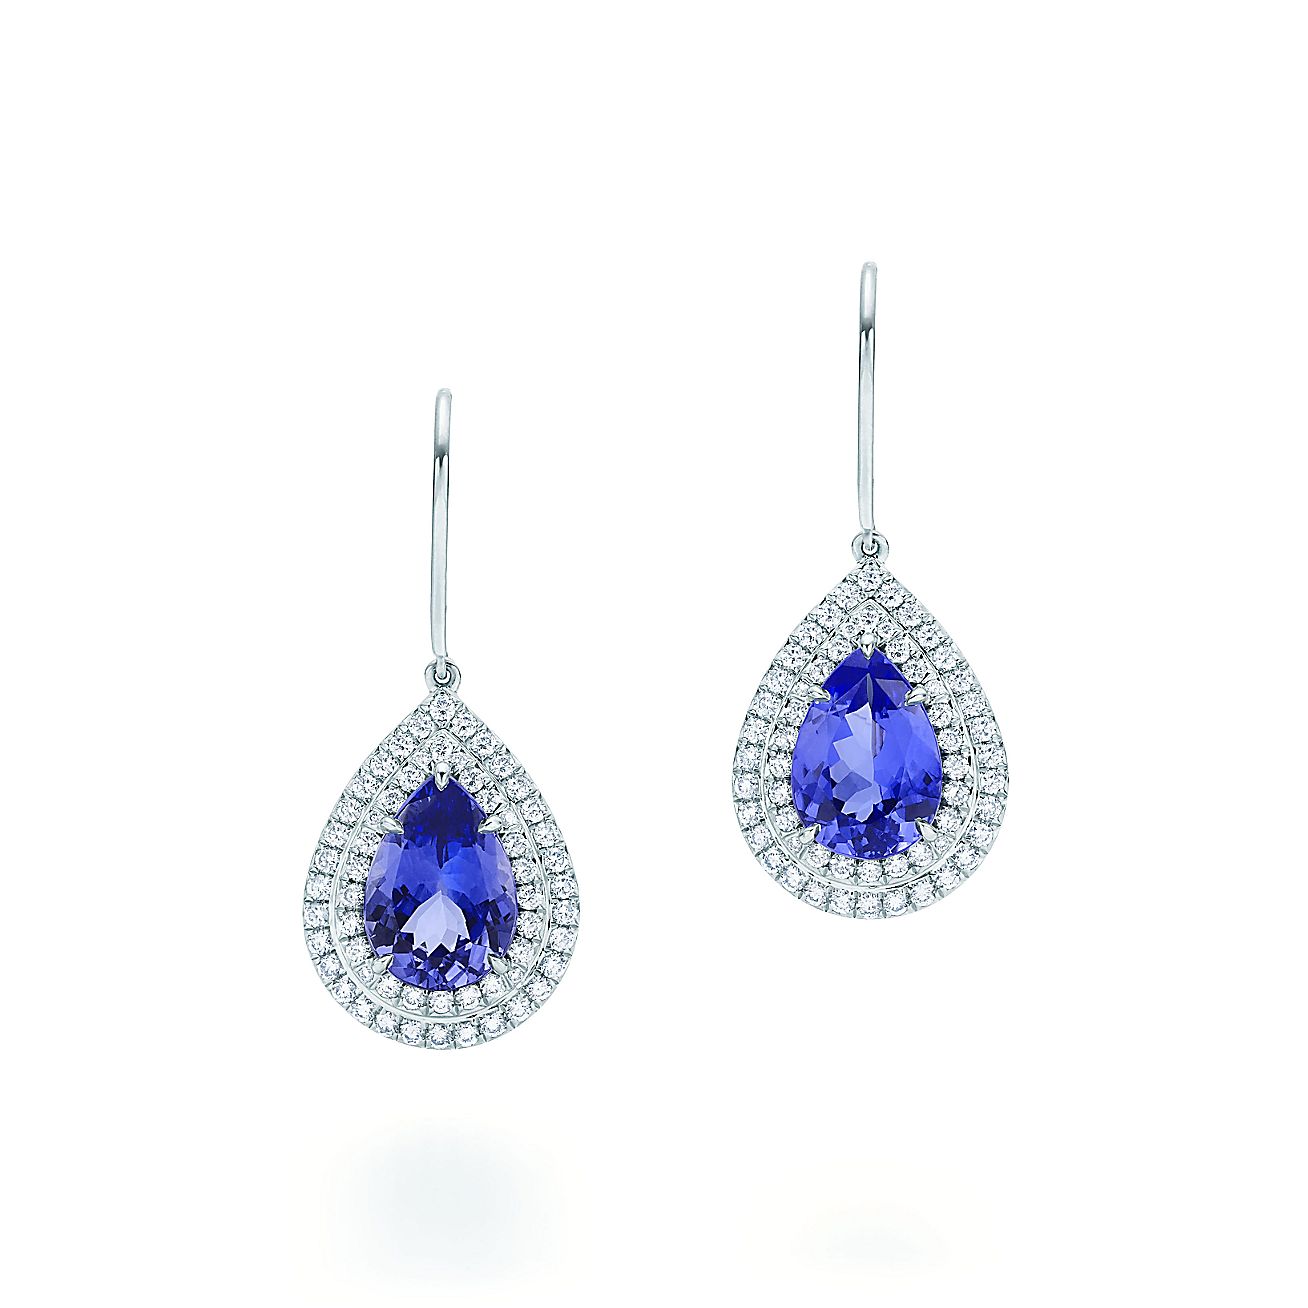 Tiffany Soleste earrings in platinum with tanzanites and diamonds ...